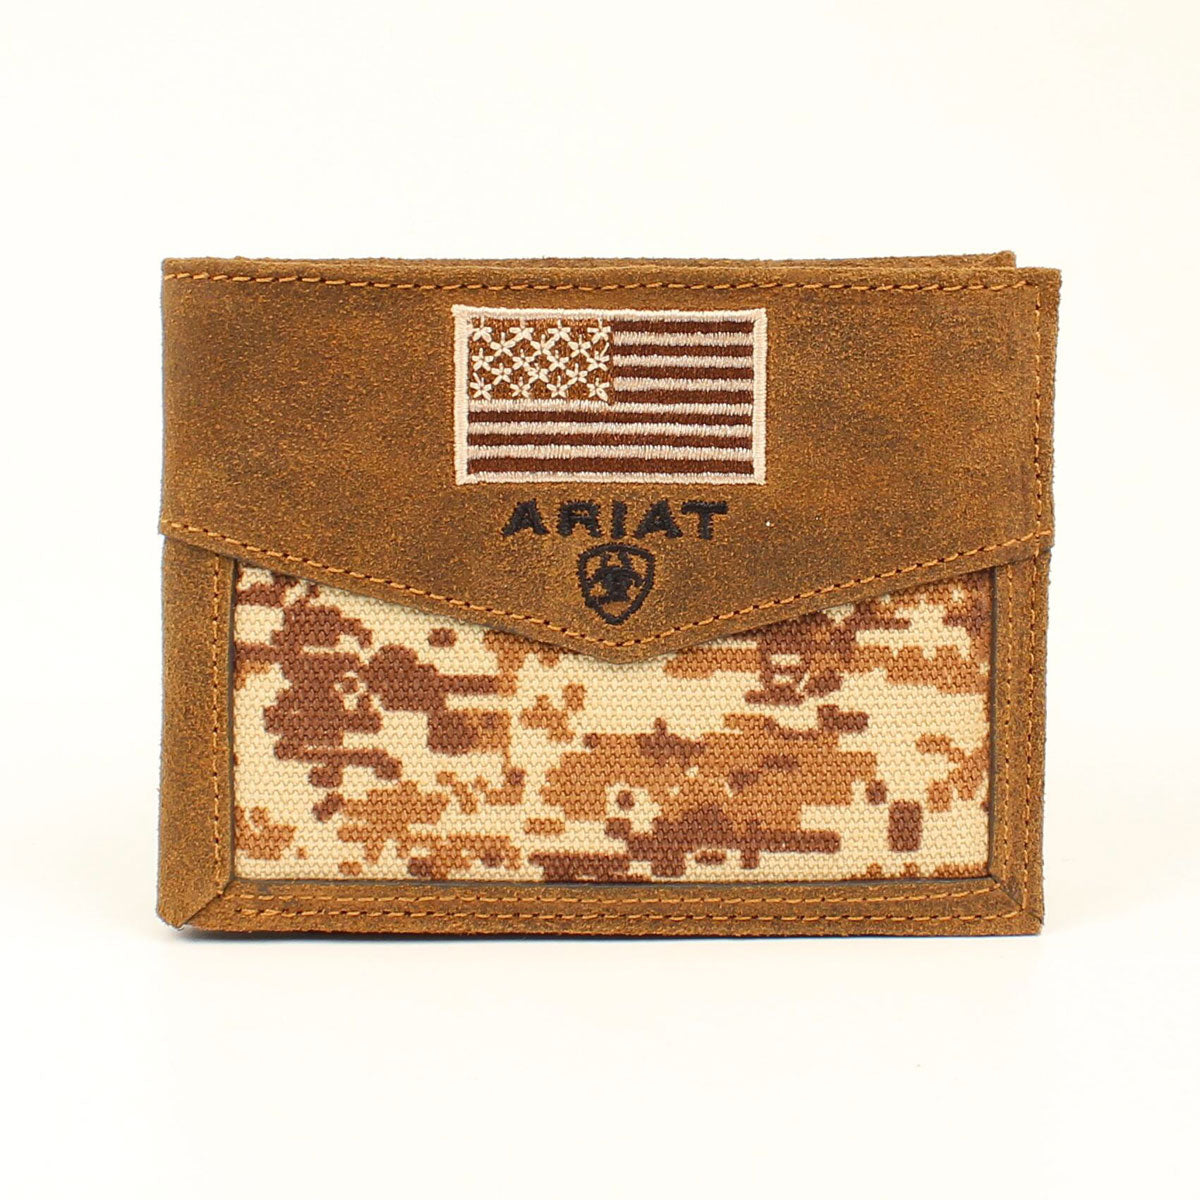 Ariat Camo Bifold Wallet STYLE A3536844